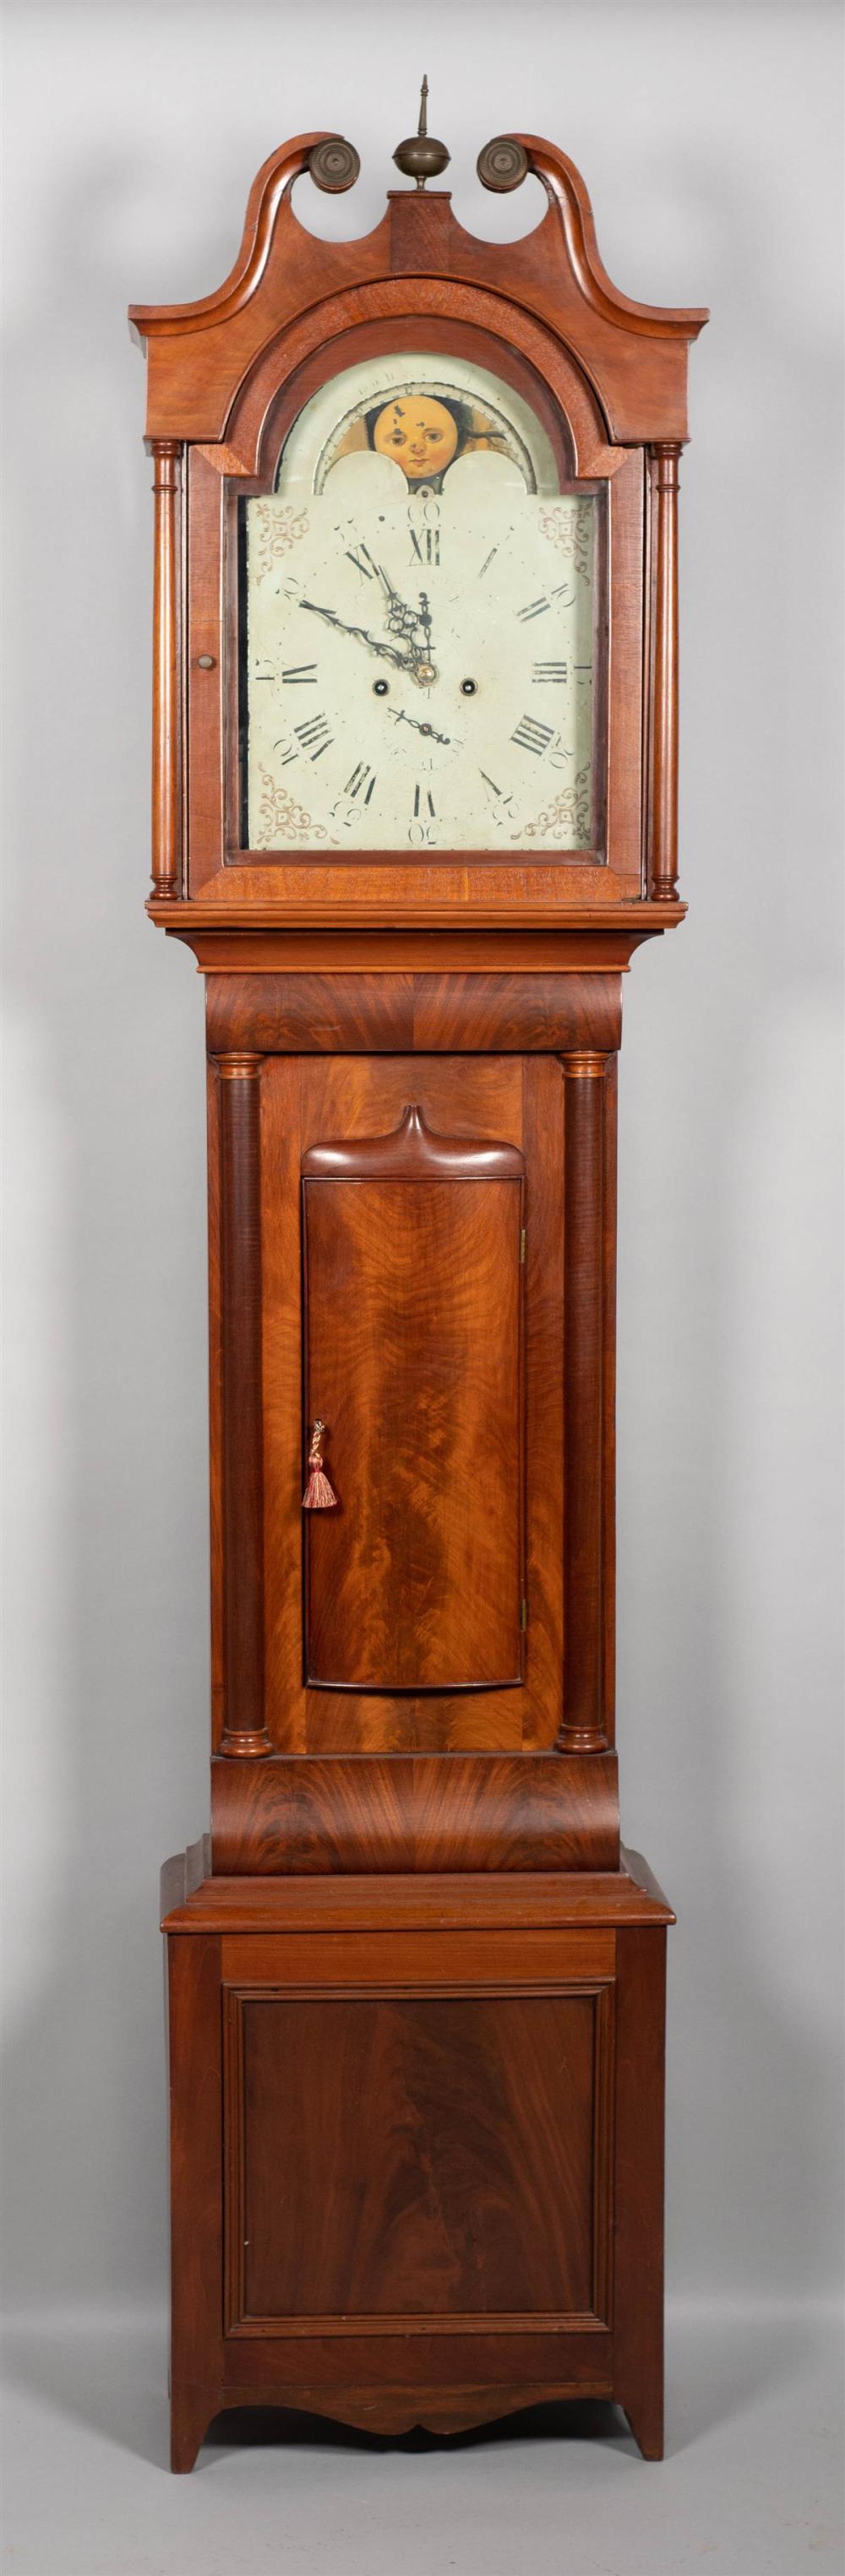 CHIPPENDALE STYLE MAHOGANY TALL 33ad5e